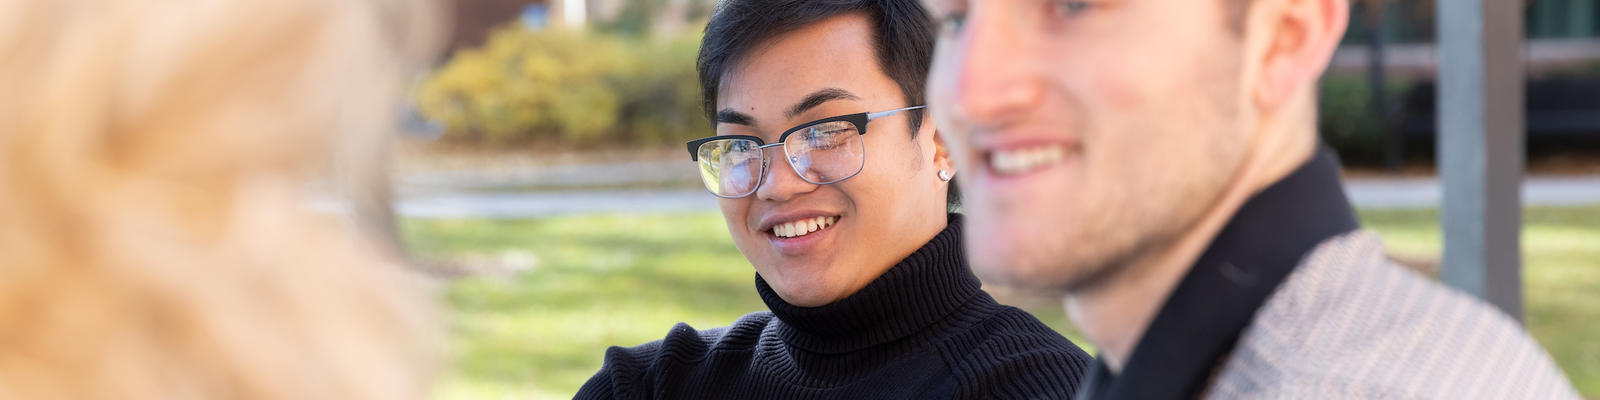 Student with glasses smiling in a small group of people talking.